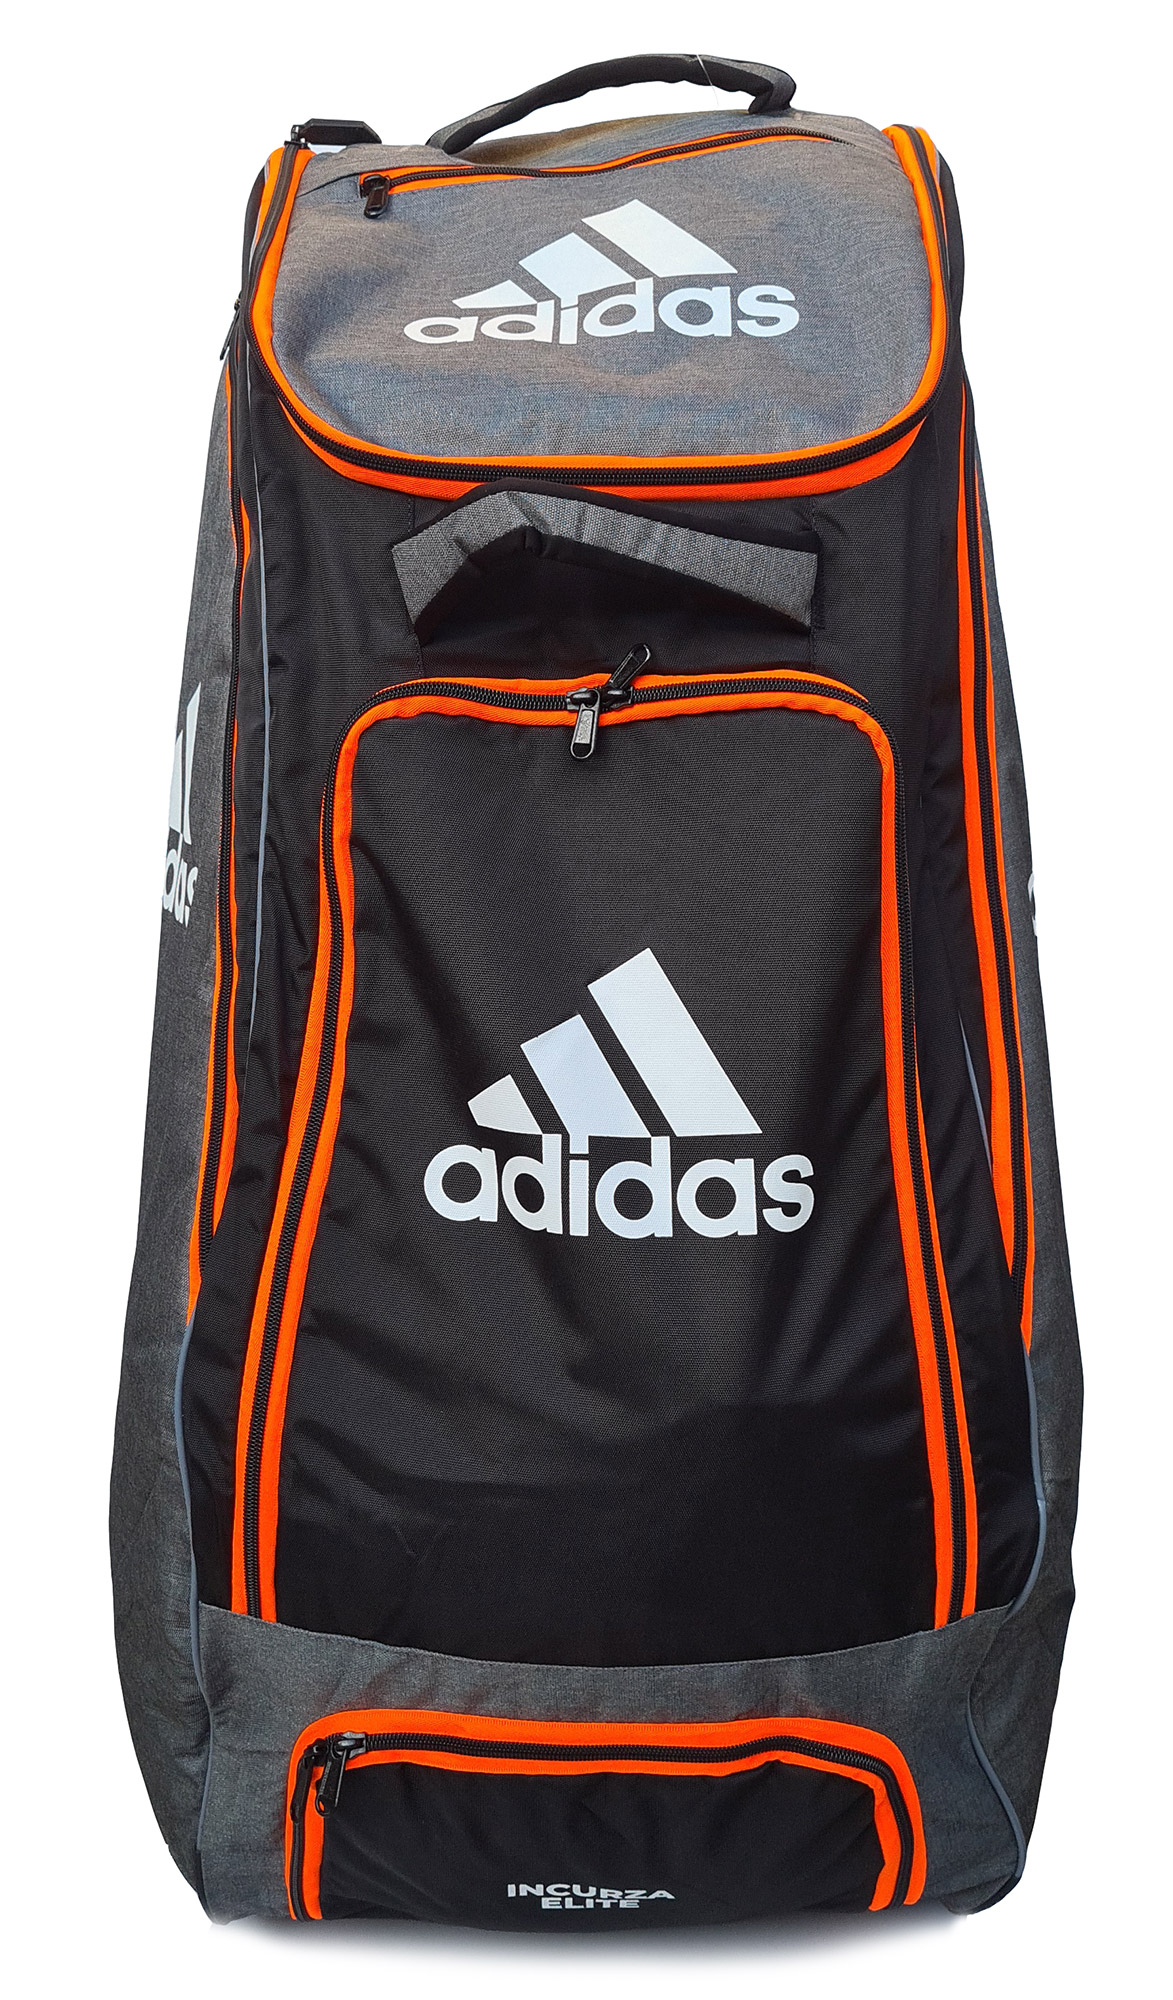 adidas cricket bags with wheels